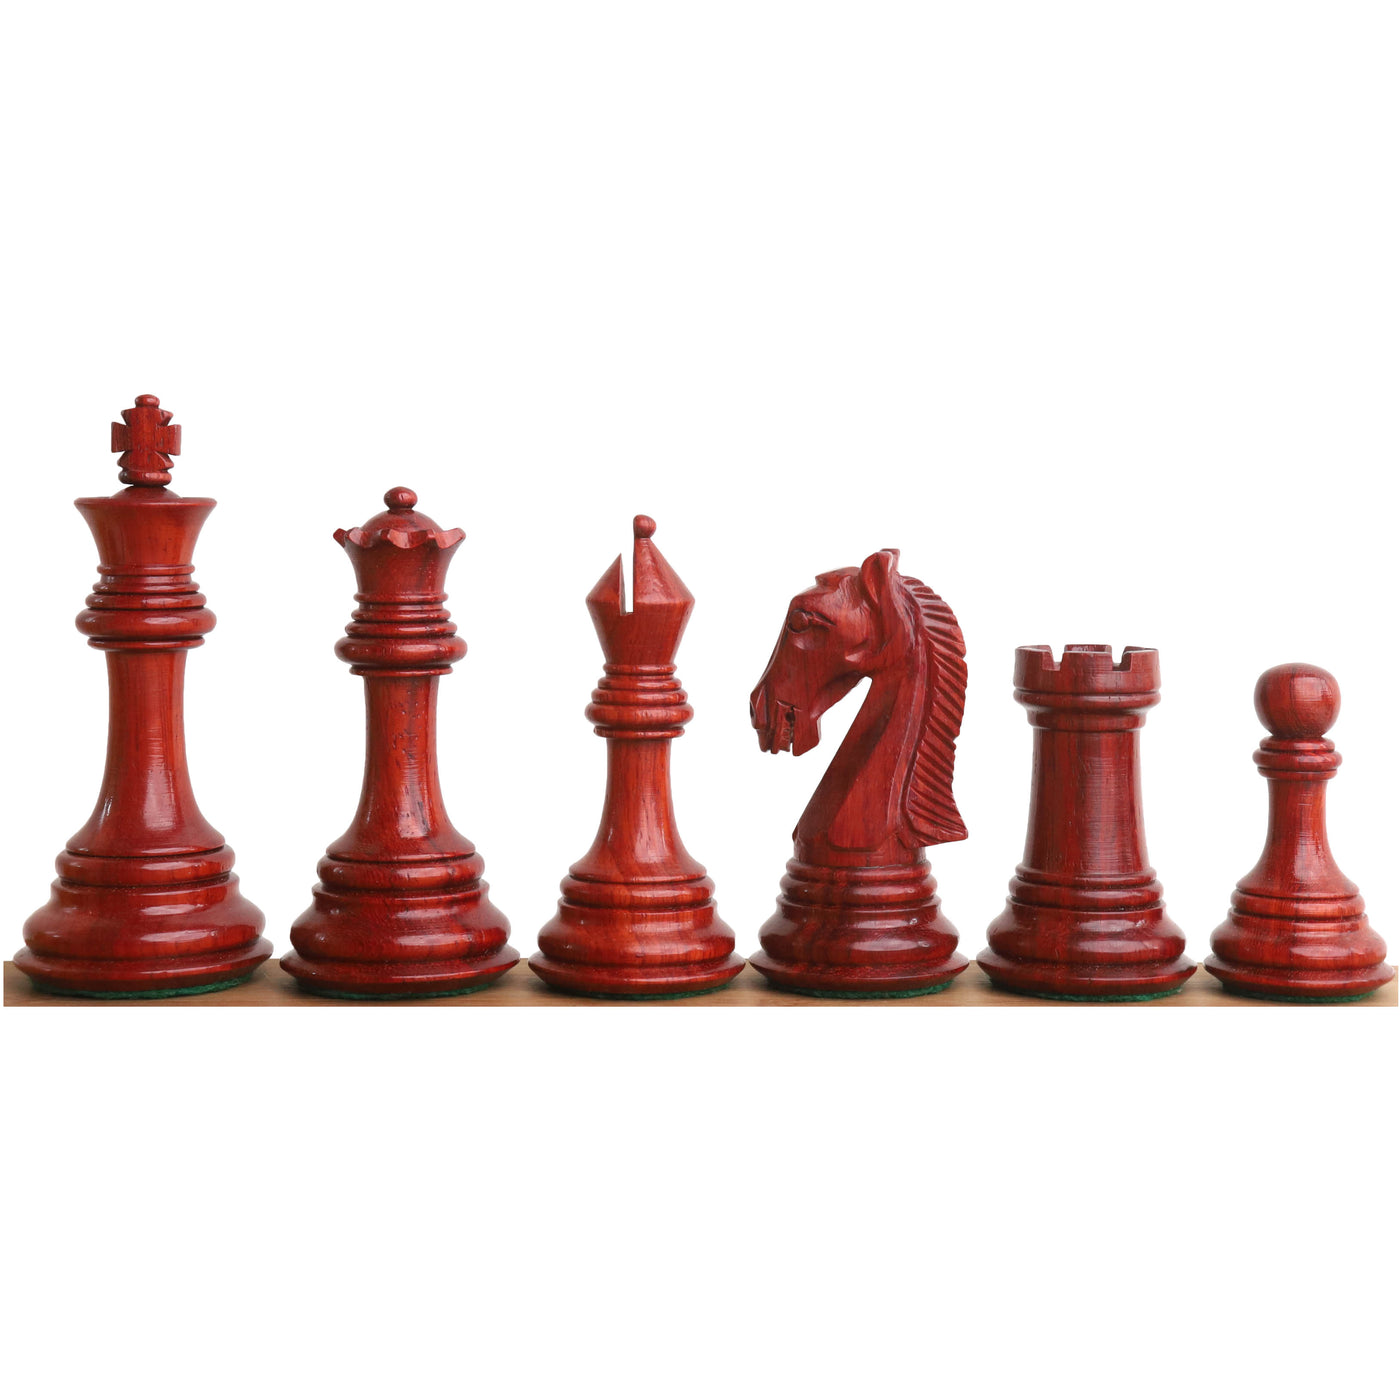 3.9" New Columbian Staunton Chess Pieces Only Set -Bud Rosewood- Double Weighted